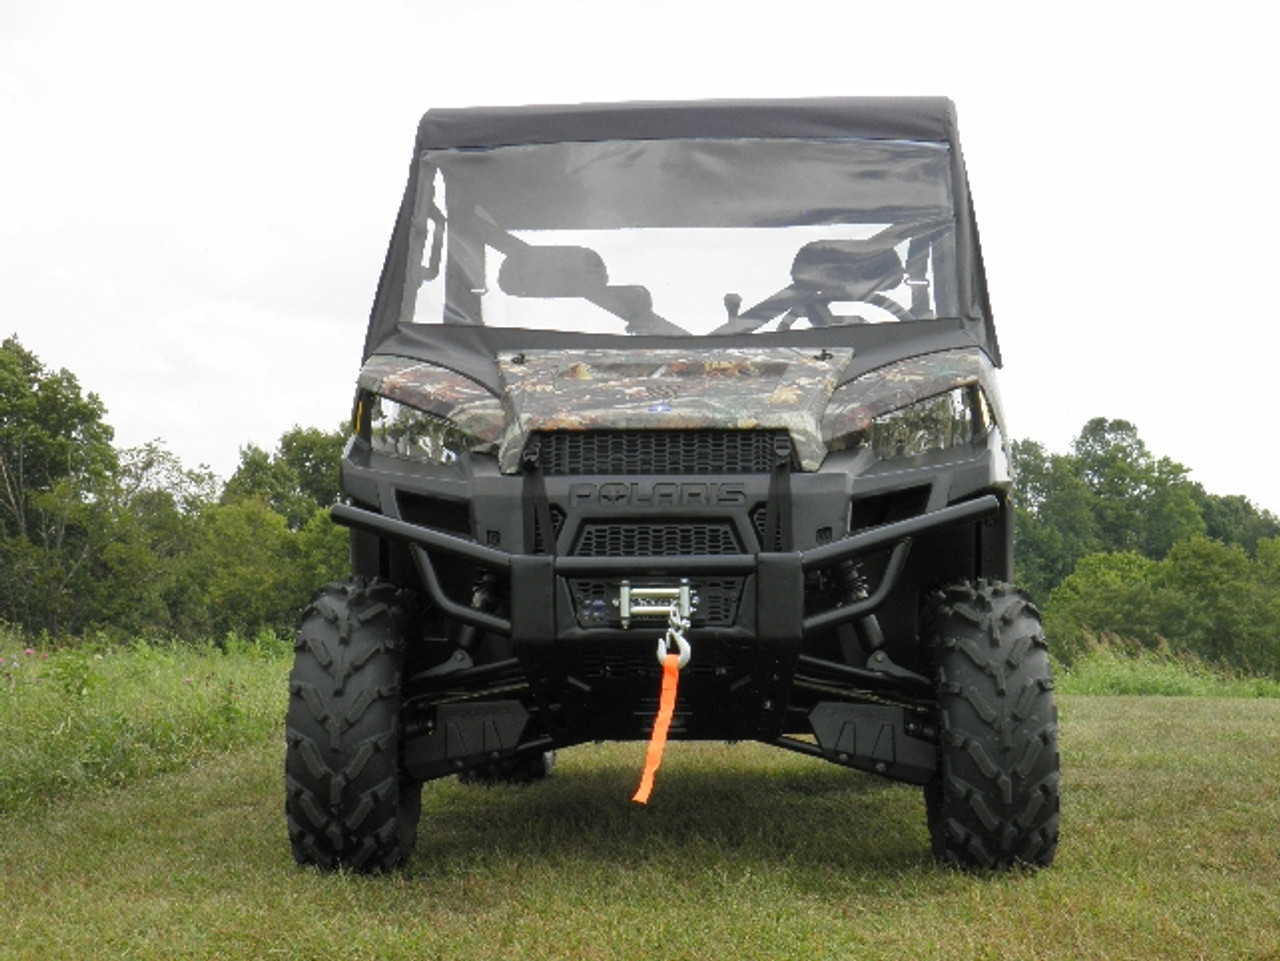 3 Star side x side Polaris Ranger XP900 570 XP570 XP1000 1000 soft full cab enclosure with vinyl windshield front view